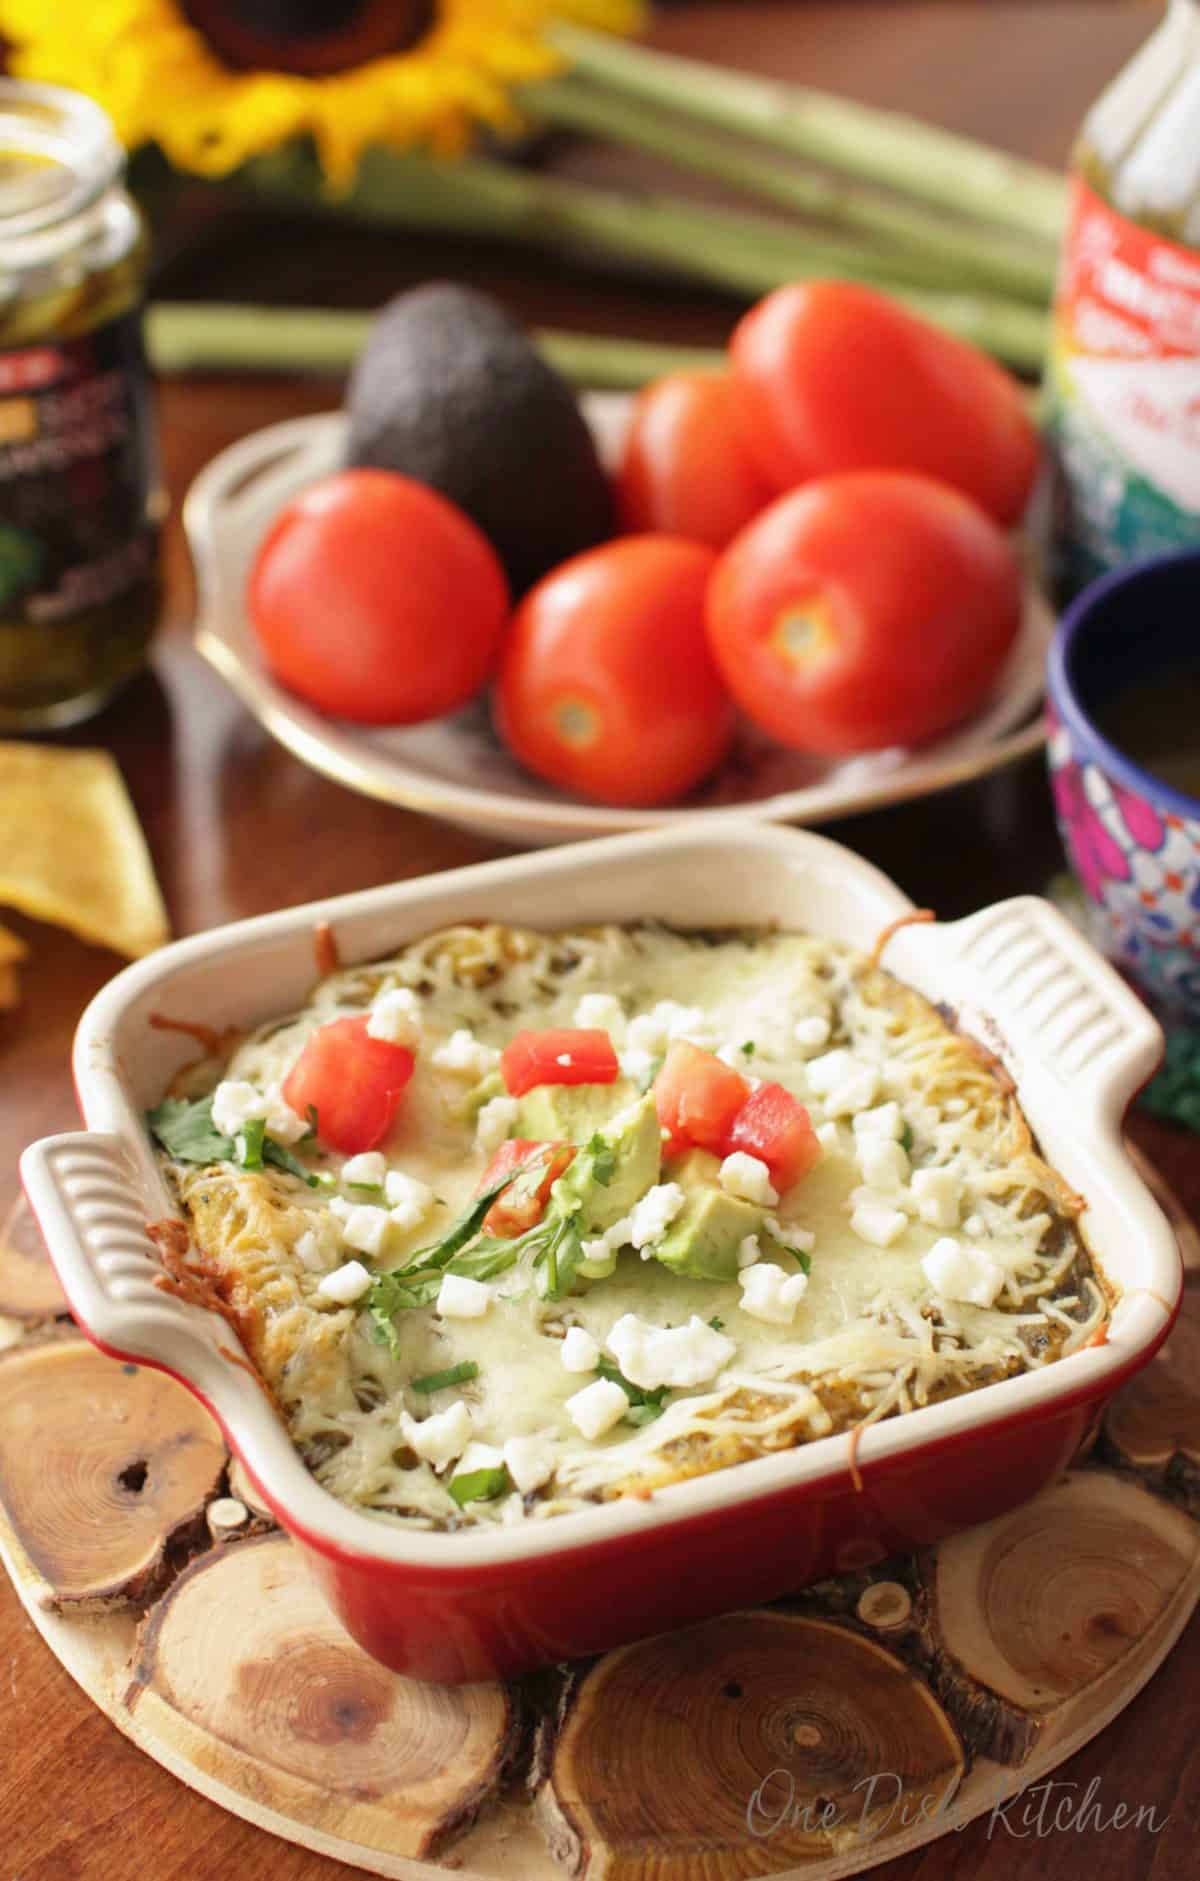 Enchiladas topped with crumbled cotija cheese and chopped avocado and tomatoes in a small baking dish on a wooden trivet next to a bowl of tomatoes and avocados.